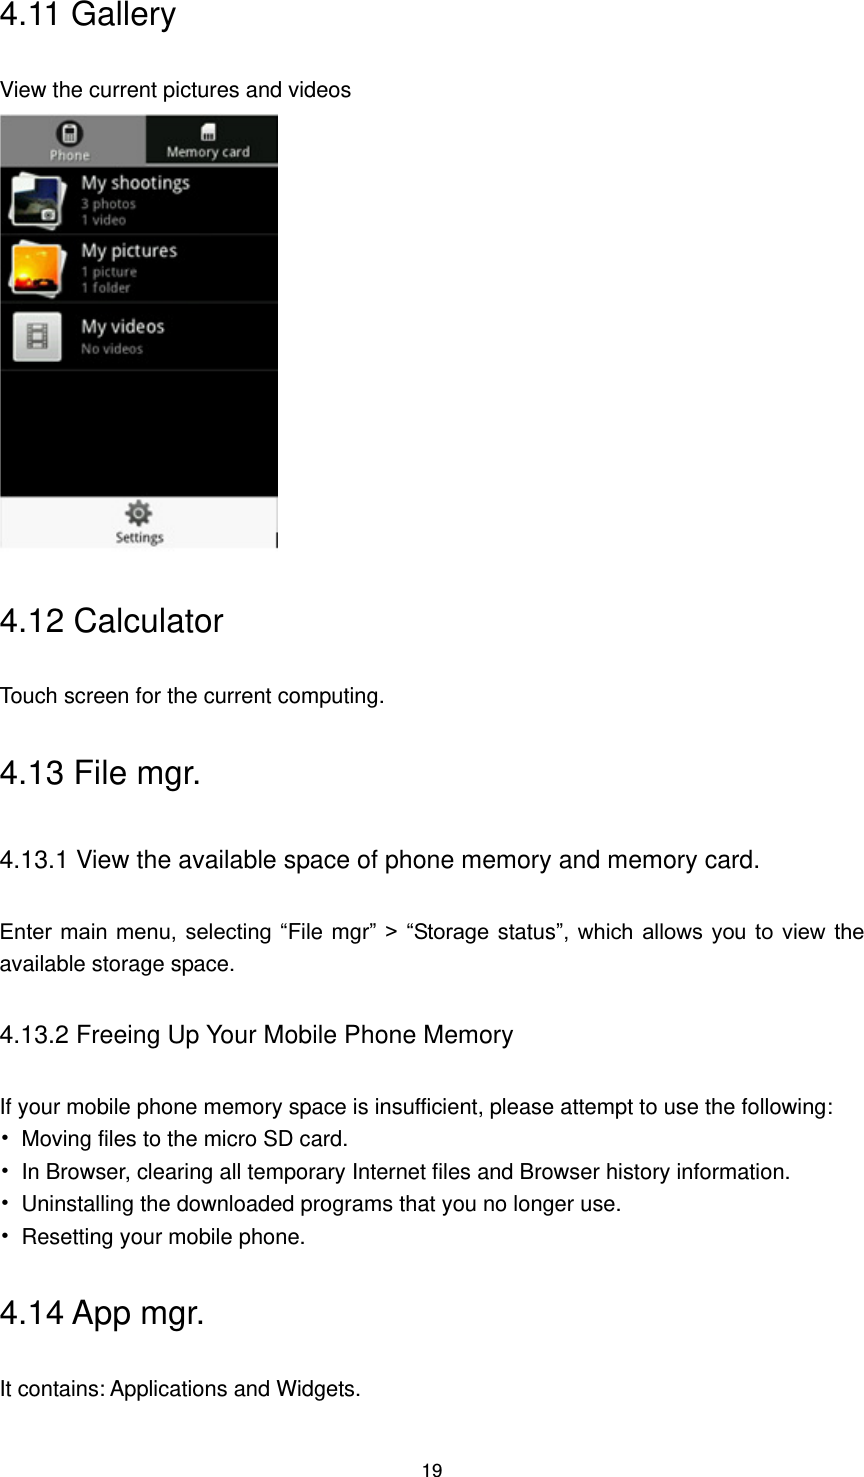 19 4.11 Gallery View the current pictures and videos  4.12 Calculator Touch screen for the current computing. 4.13 File mgr. 4.13.1 View the available space of phone memory and memory card. Enter main  menu, selecting  “File mgr” &gt; “Storage status”, which  allows  you  to  view  the available storage space. 4.13.2 Freeing Up Your Mobile Phone Memory If your mobile phone memory space is insufficient, please attempt to use the following: •  Moving files to the micro SD card. •  In Browser, clearing all temporary Internet files and Browser history information.   •  Uninstalling the downloaded programs that you no longer use. •  Resetting your mobile phone. 4.14 App mgr. It contains: Applications and Widgets. 